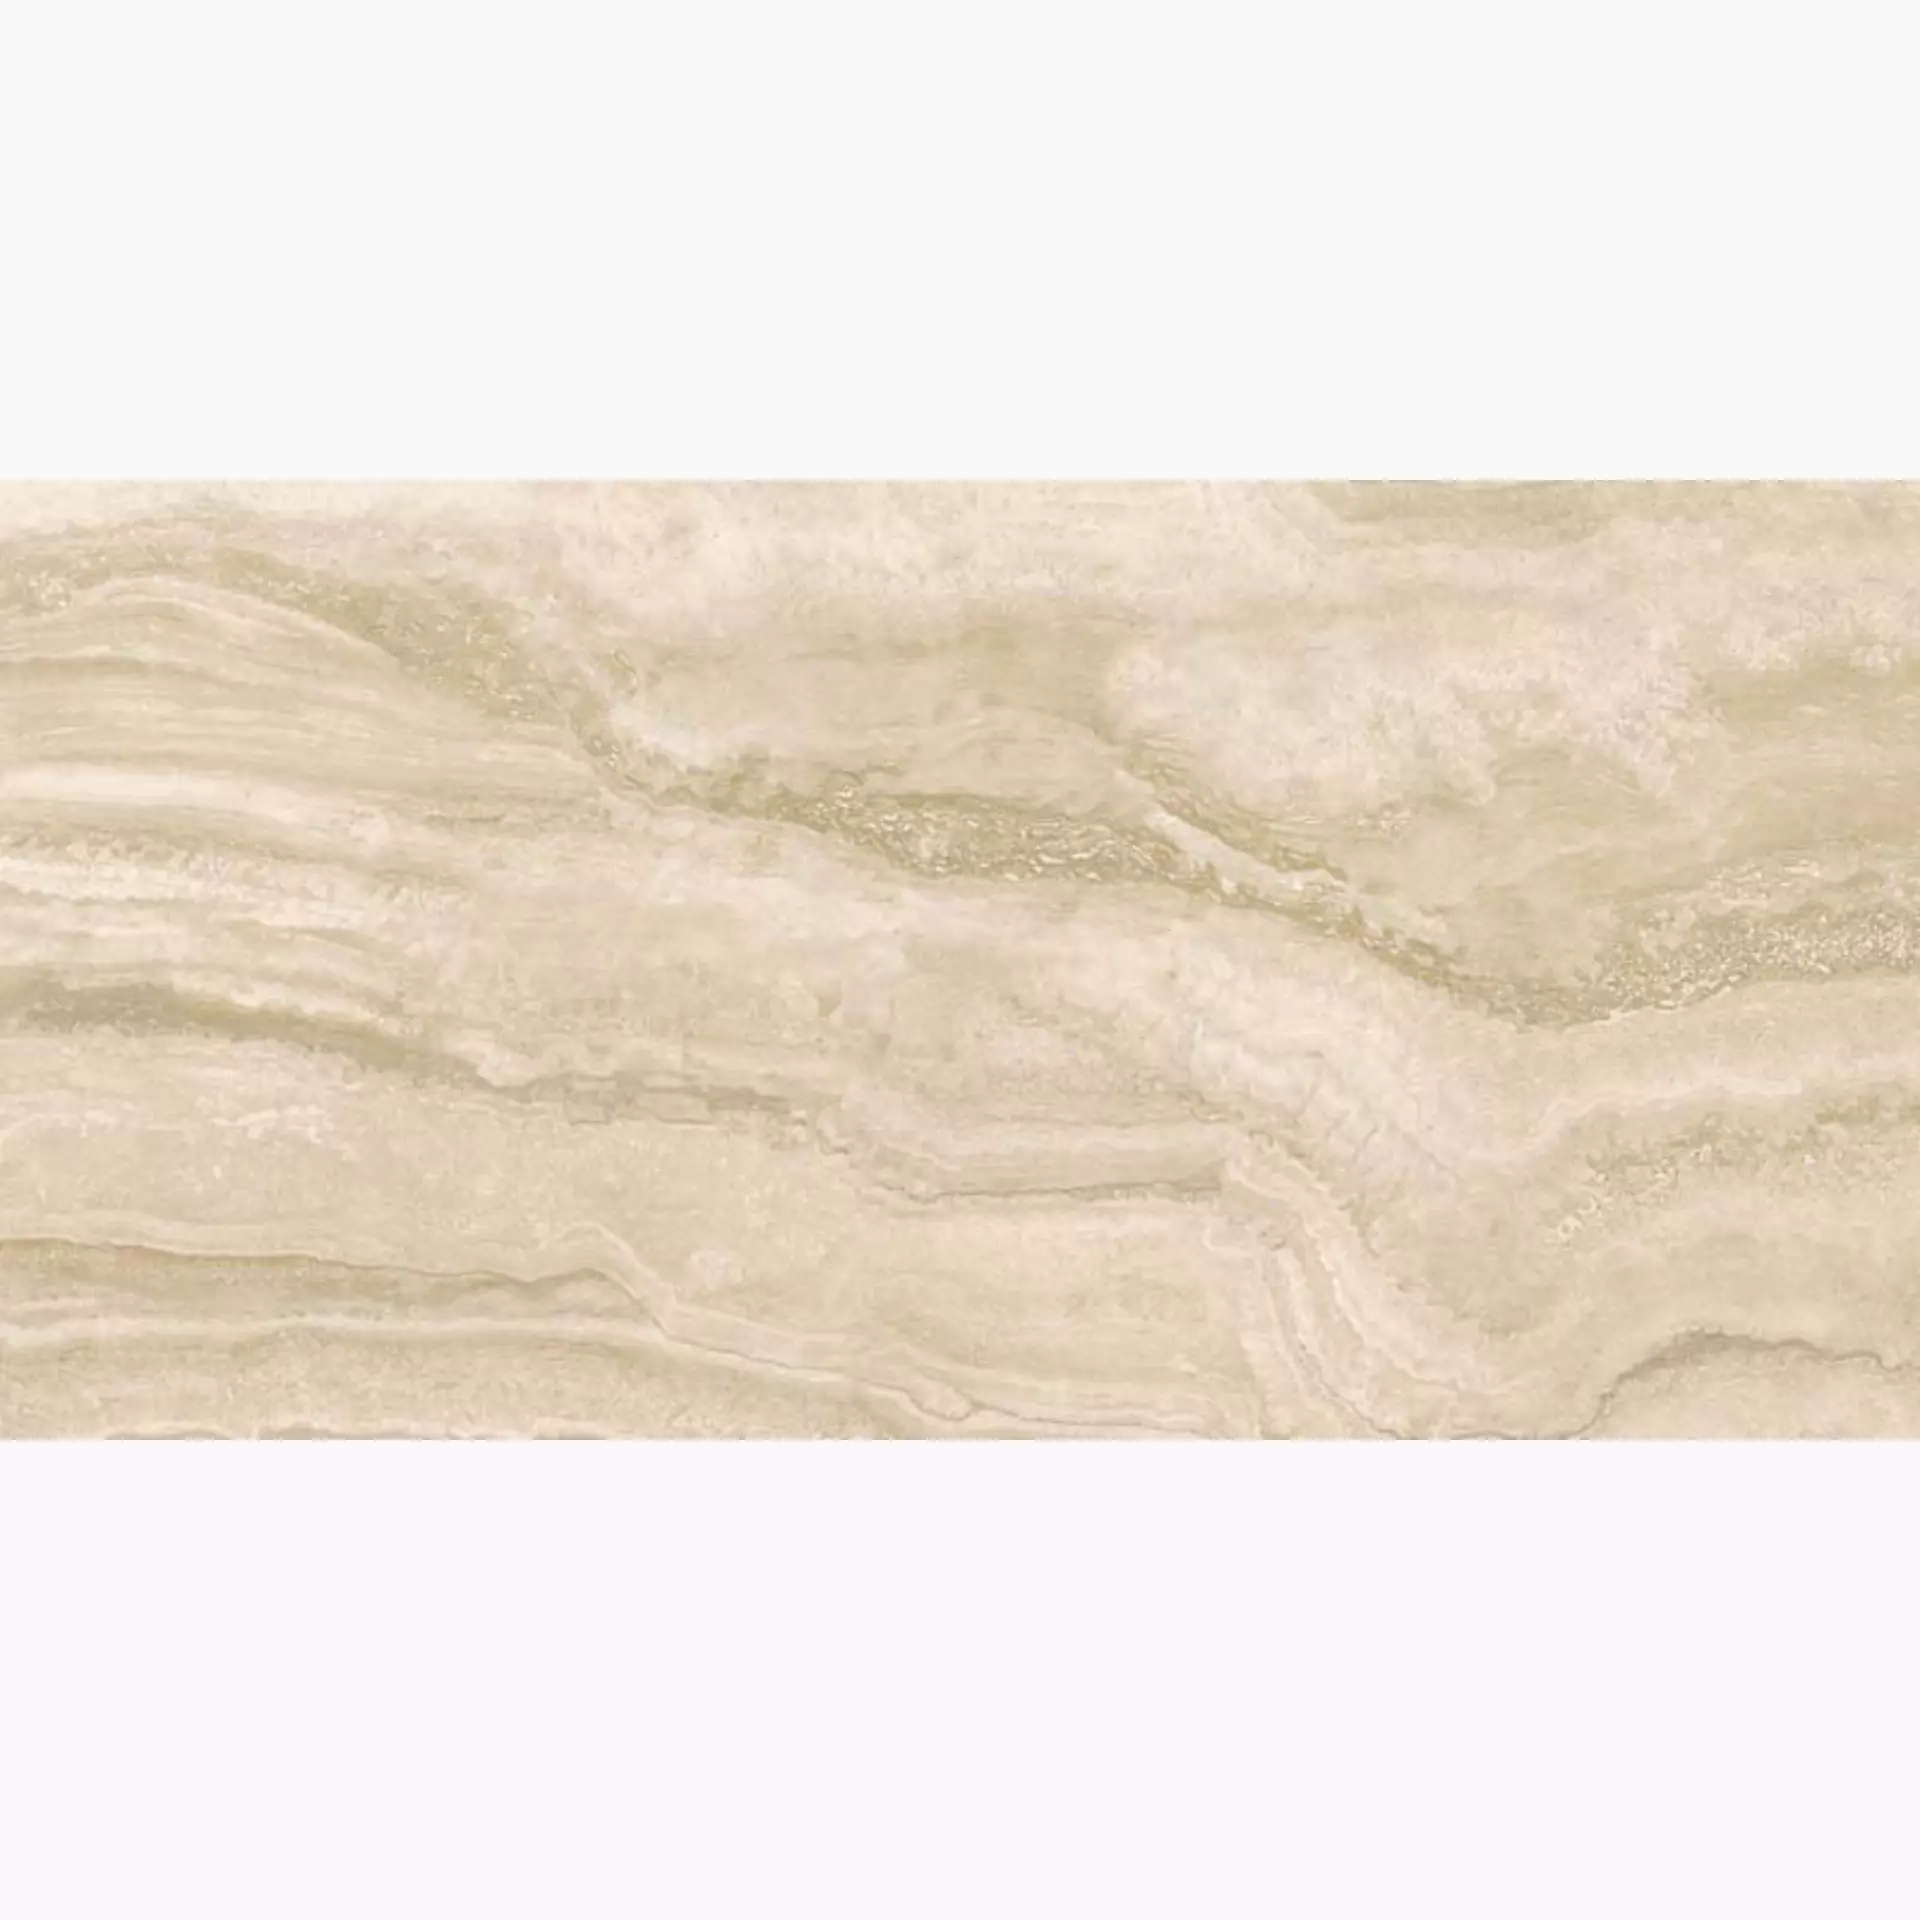 Sant Agostino Via Appia Beige Natural CSAAVCBG12 60x120cm rectified 10mm